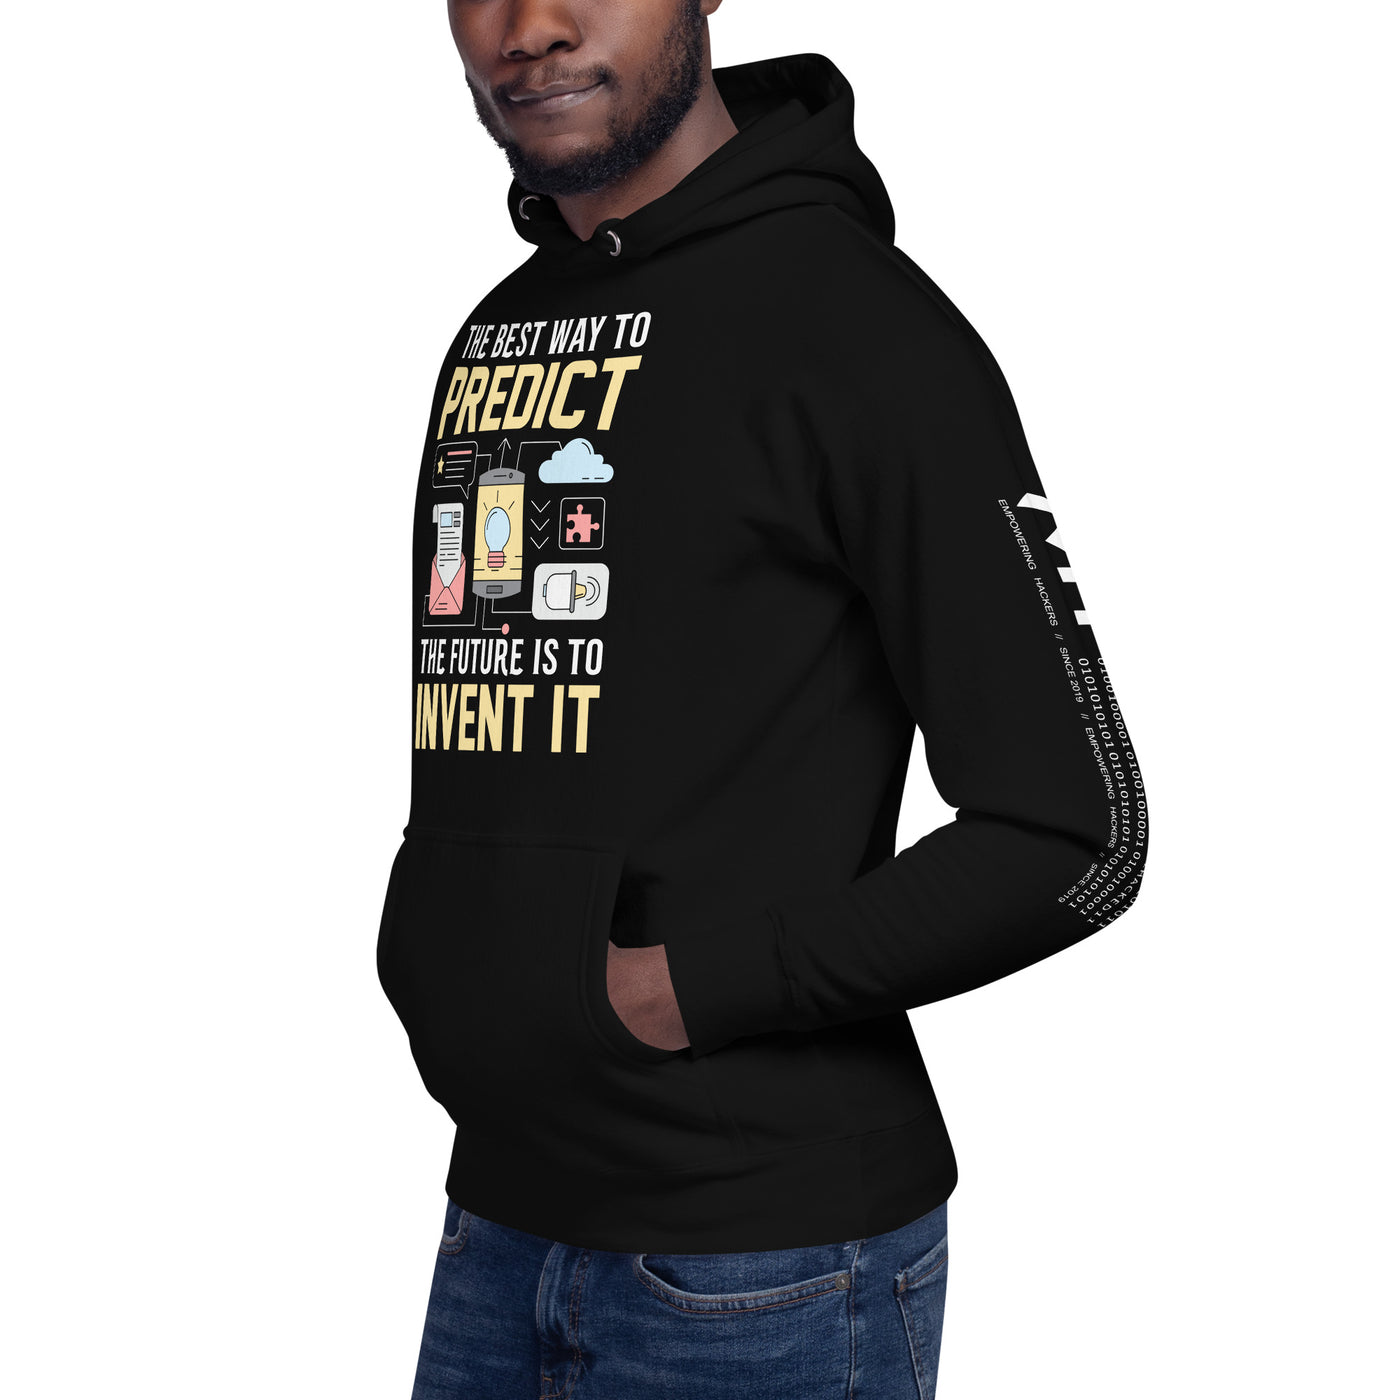 The Best Way to Predict Future is to invent it -  Unisex Hoodie